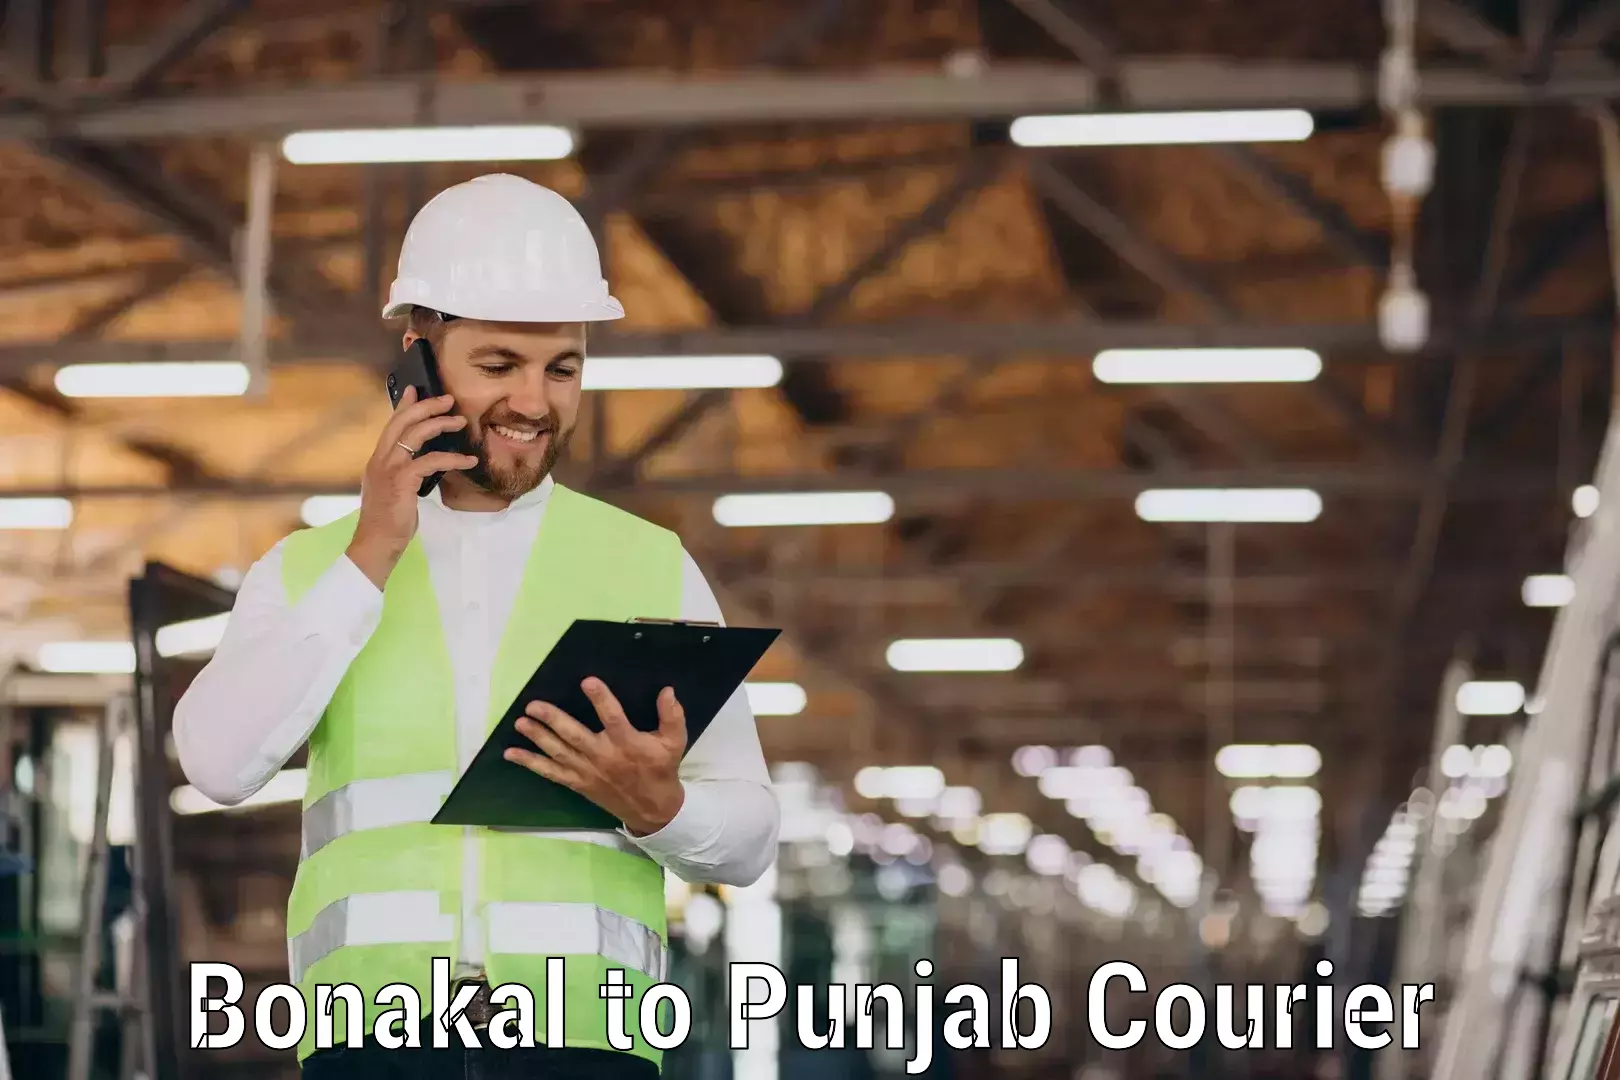 Express delivery network Bonakal to Punjab Agricultural University Ludhiana